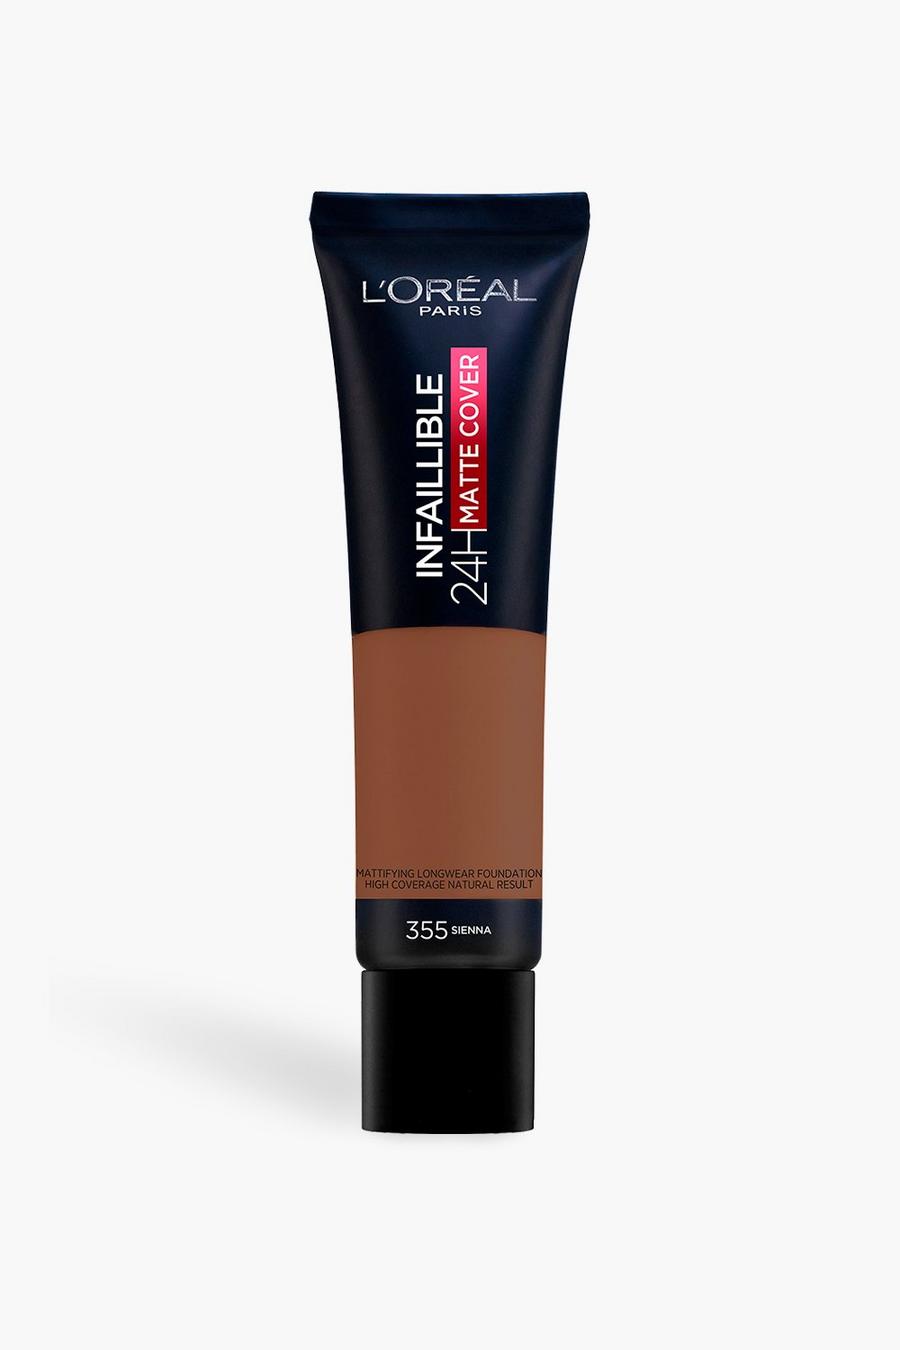 L'Oreal Paris Infallible Foundation 355 image number 1